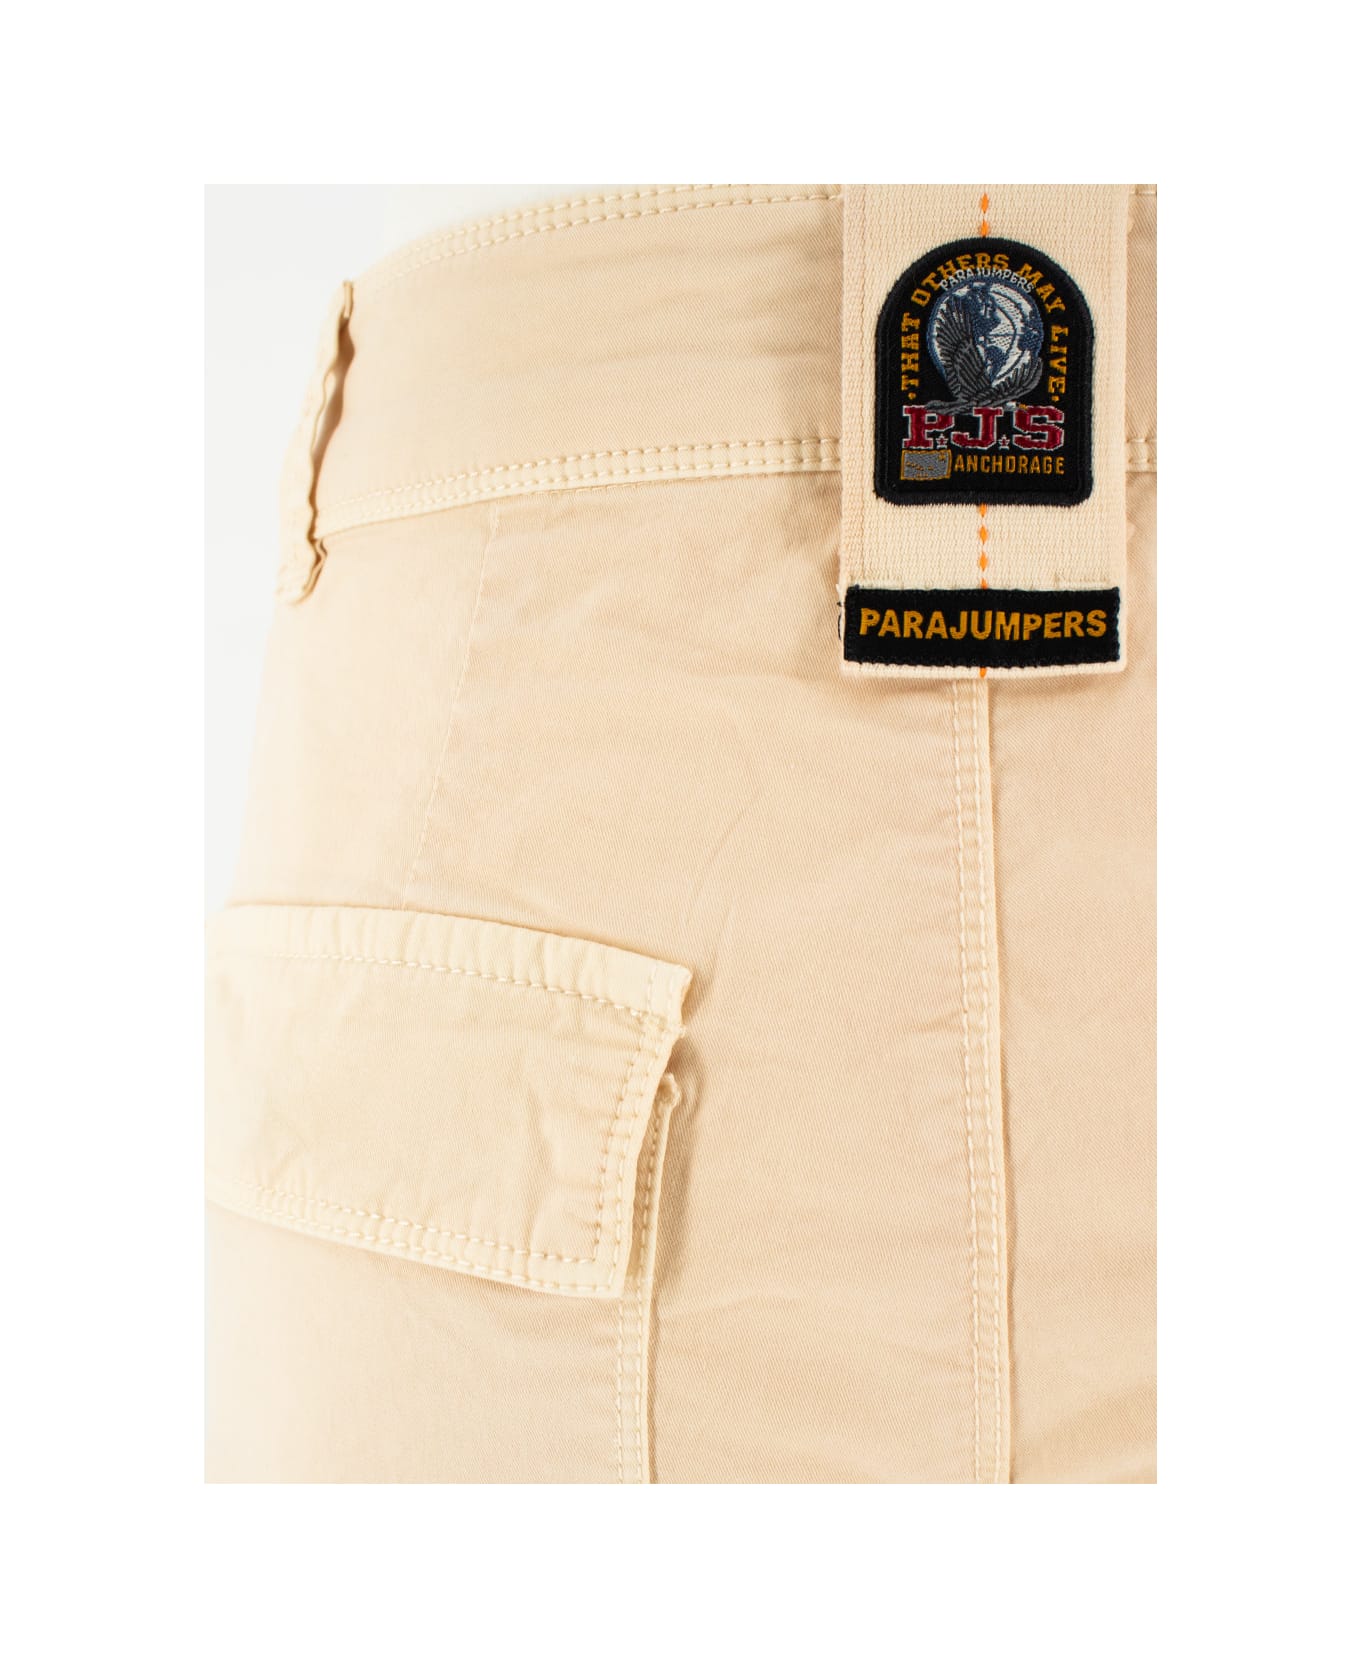 Parajumpers Trousers - ECRU ボトムス